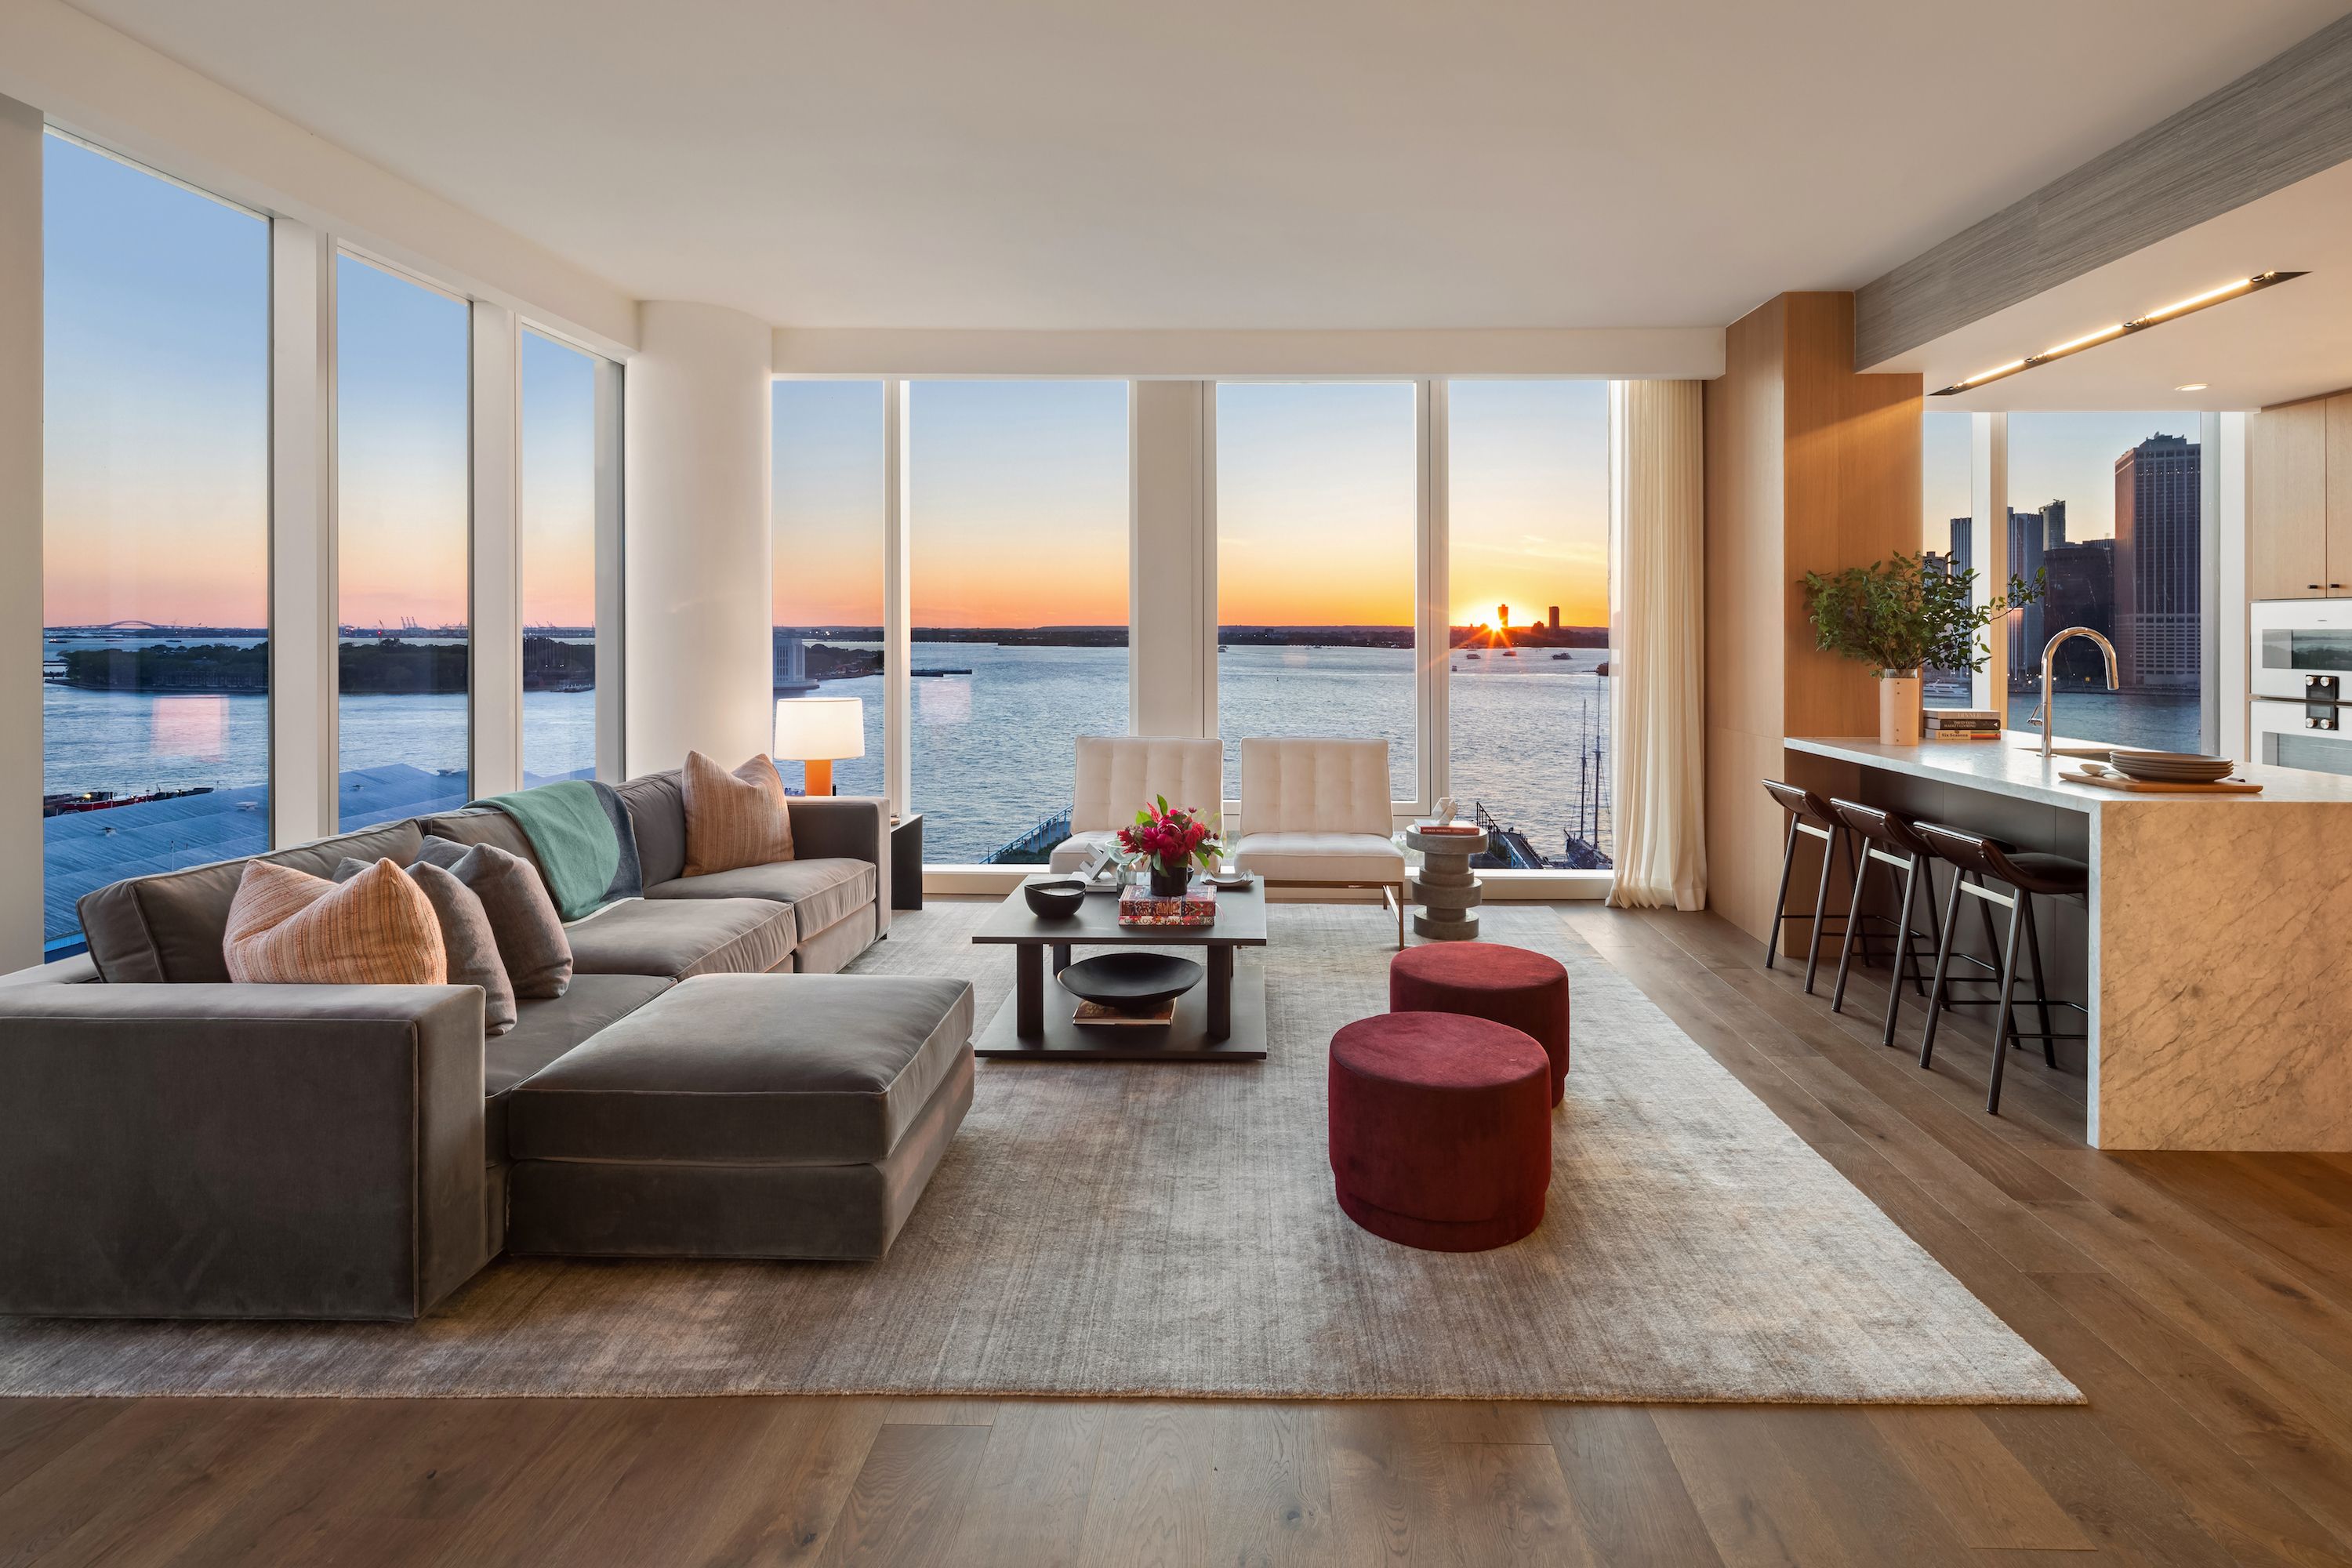 Soak In The Sunset Over The City At Quay Tower In Brooklyn